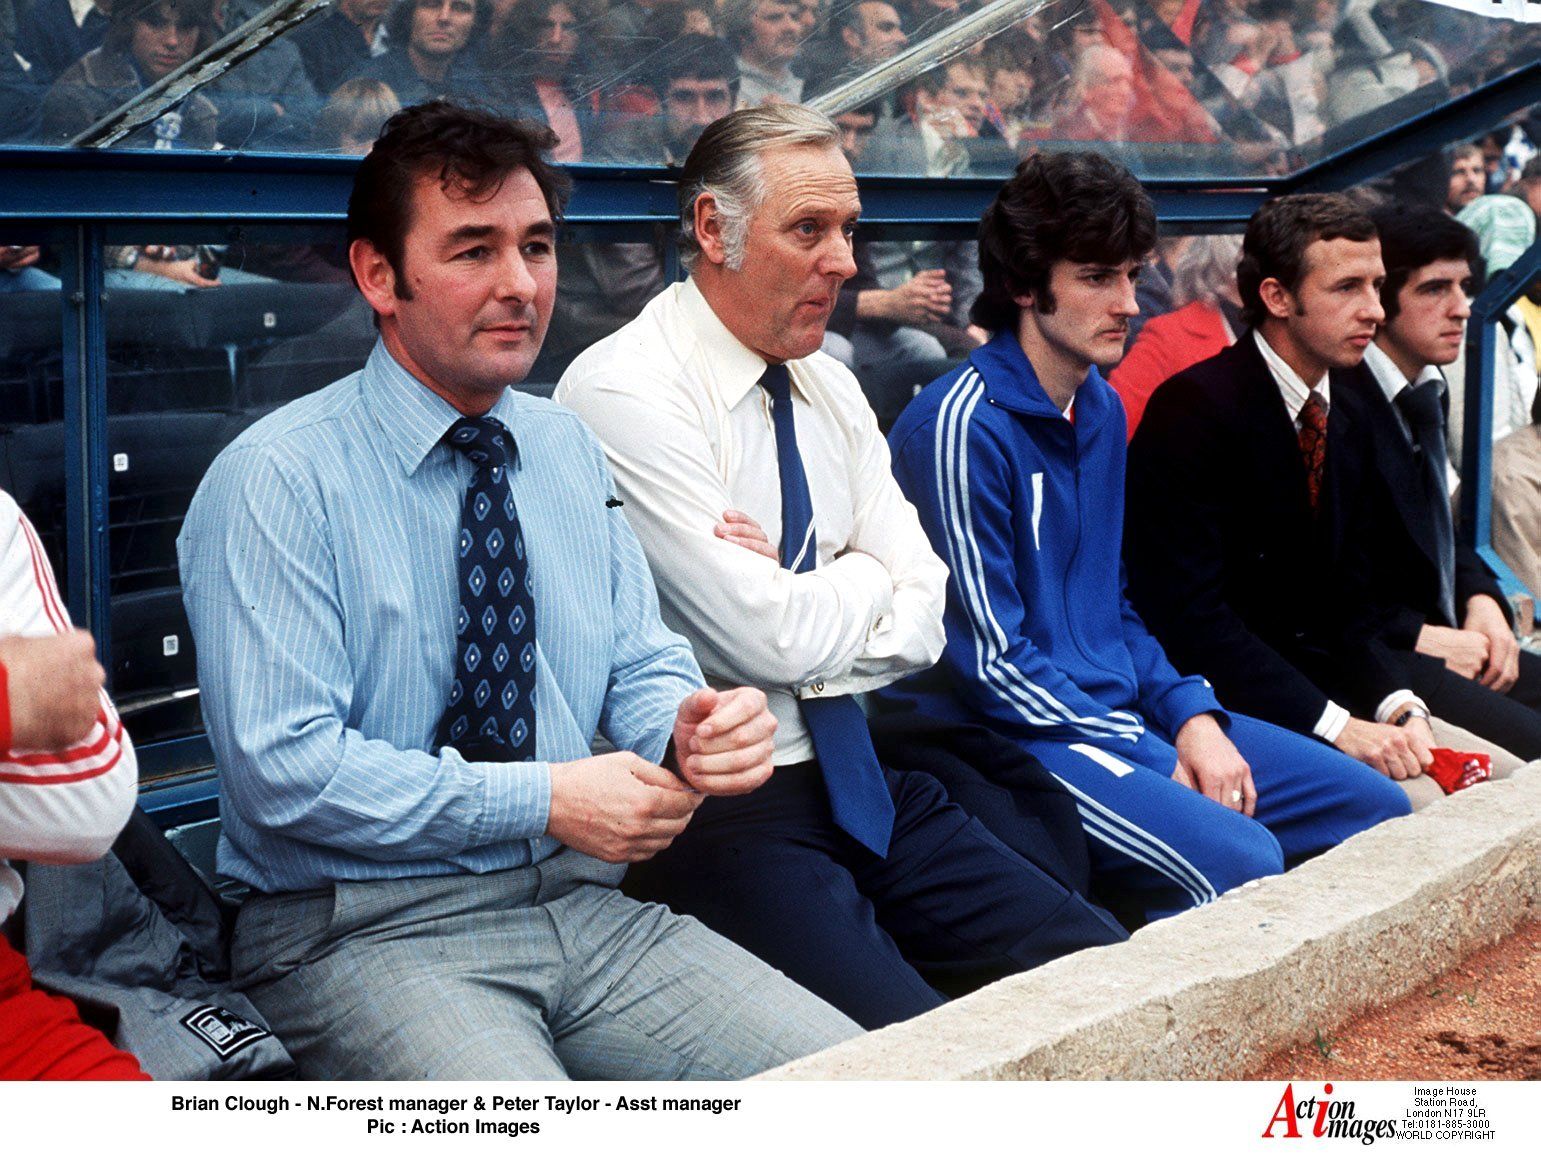 Brian Clough - N.Forest manager &amp; Peter Taylor - Asst manager 
Pic : Action Images  
Nottingham Forest